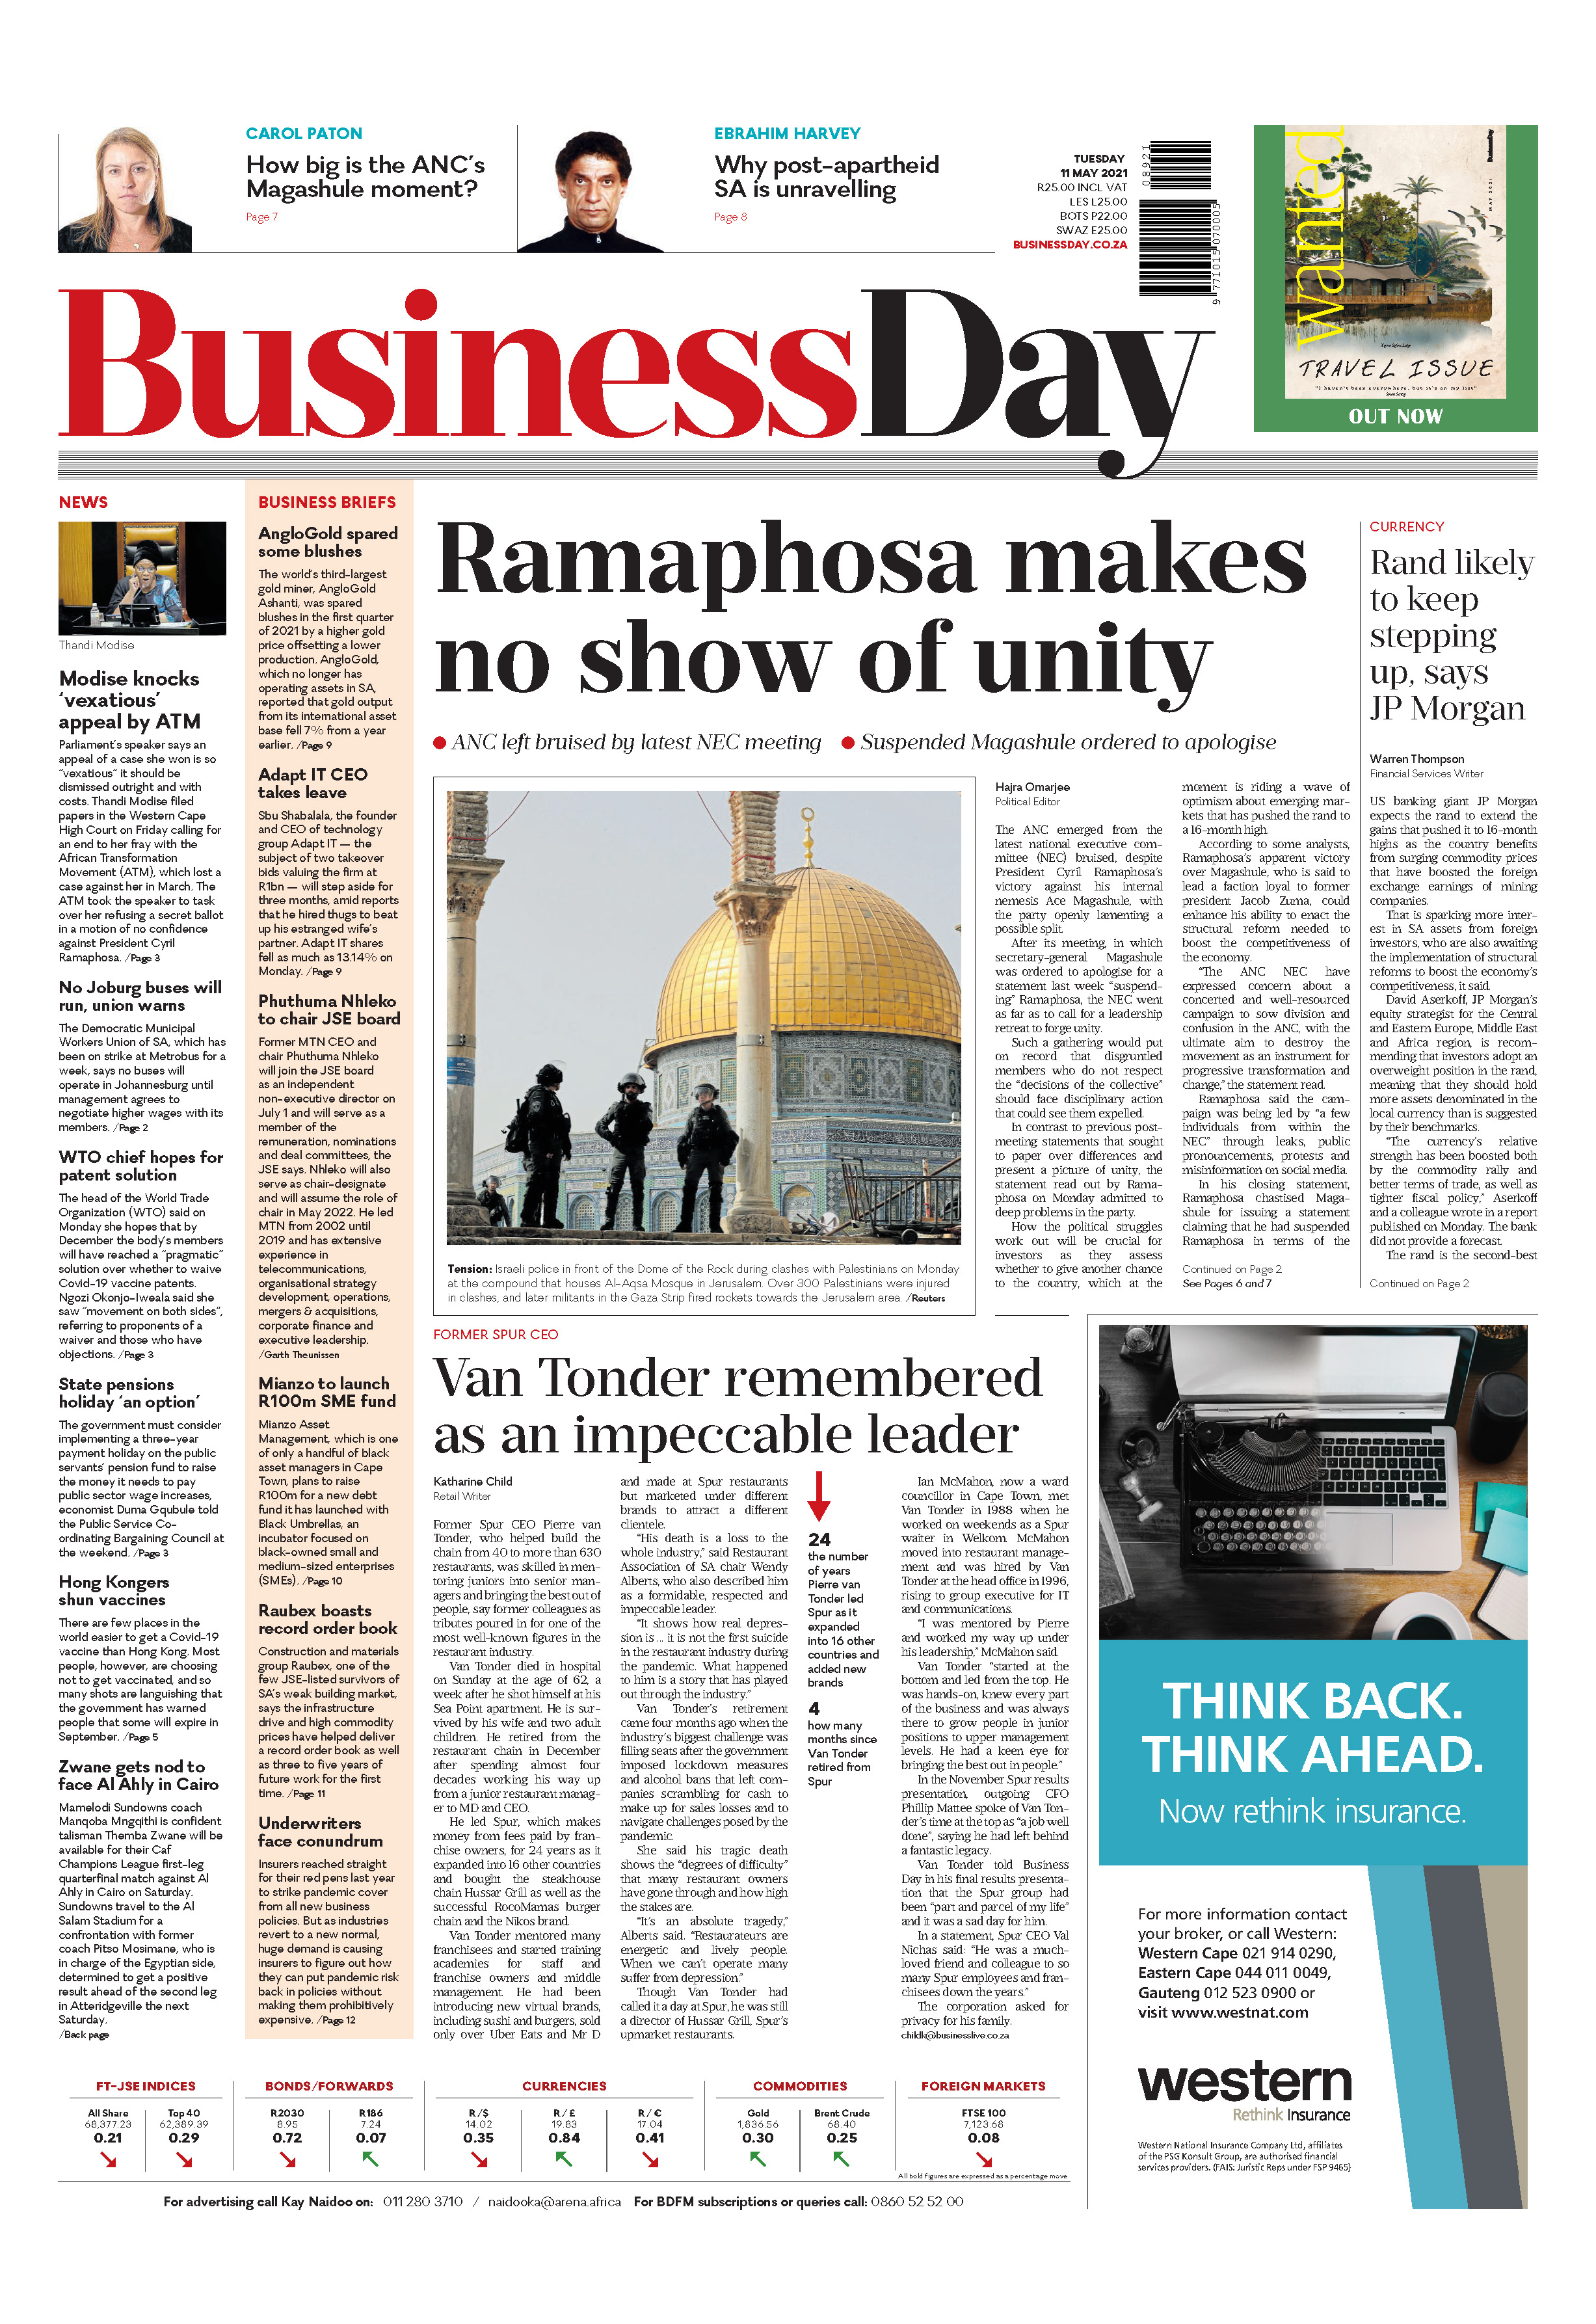 Business Day, South Africa